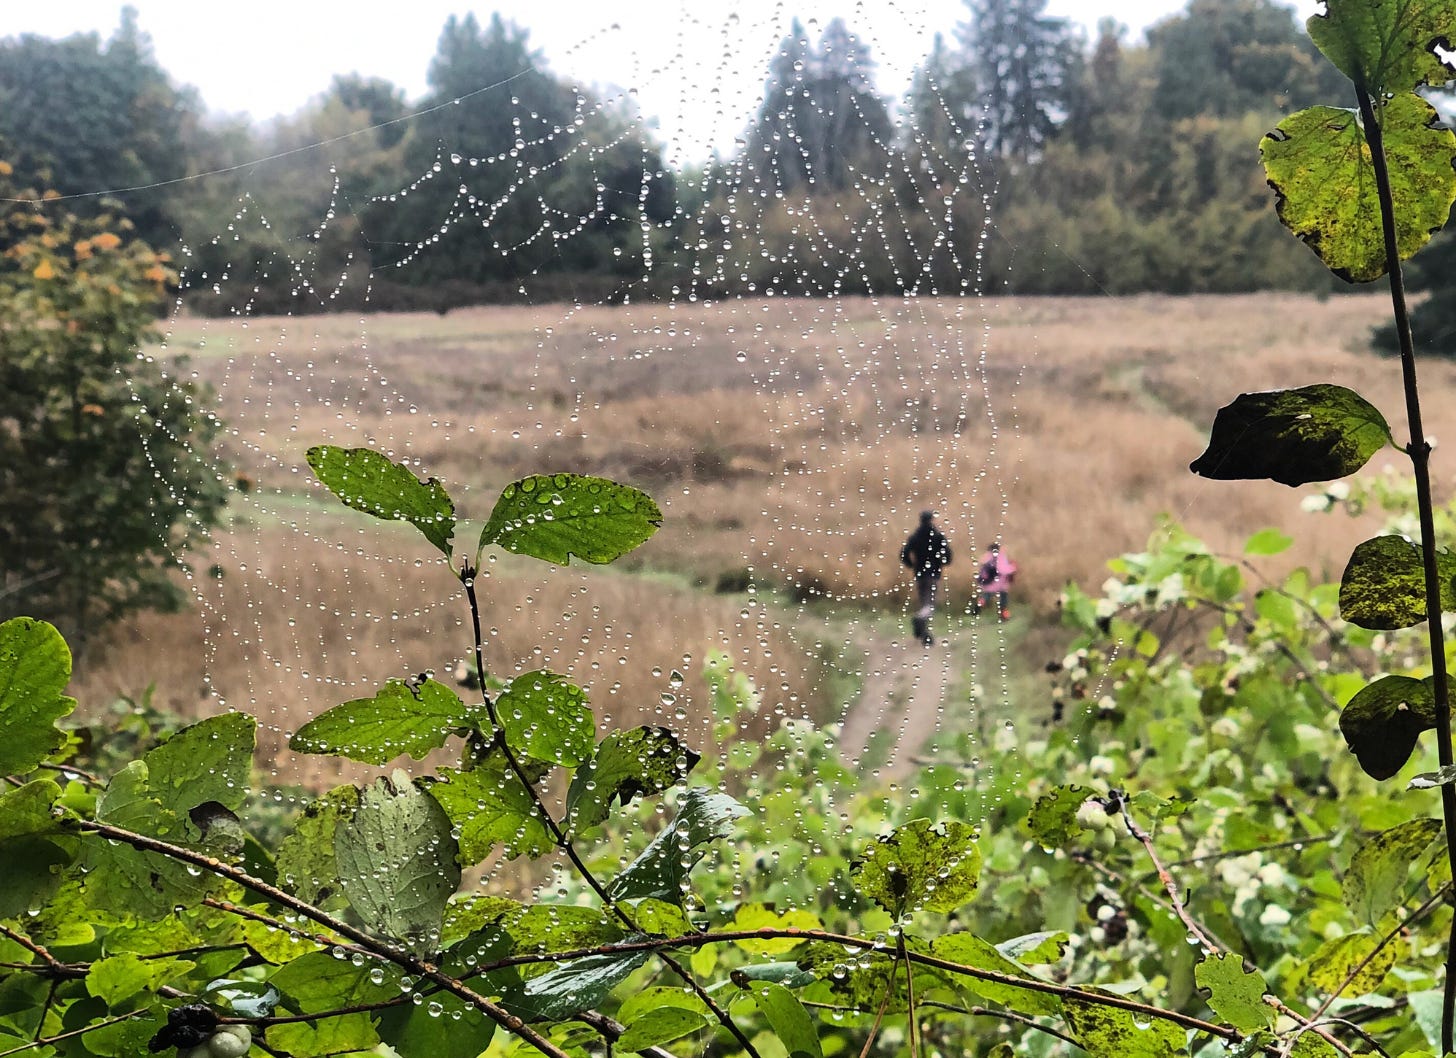 Close up of a spiderweb with droplets of dew across a green bush with a man and child running through a field in the distance. 